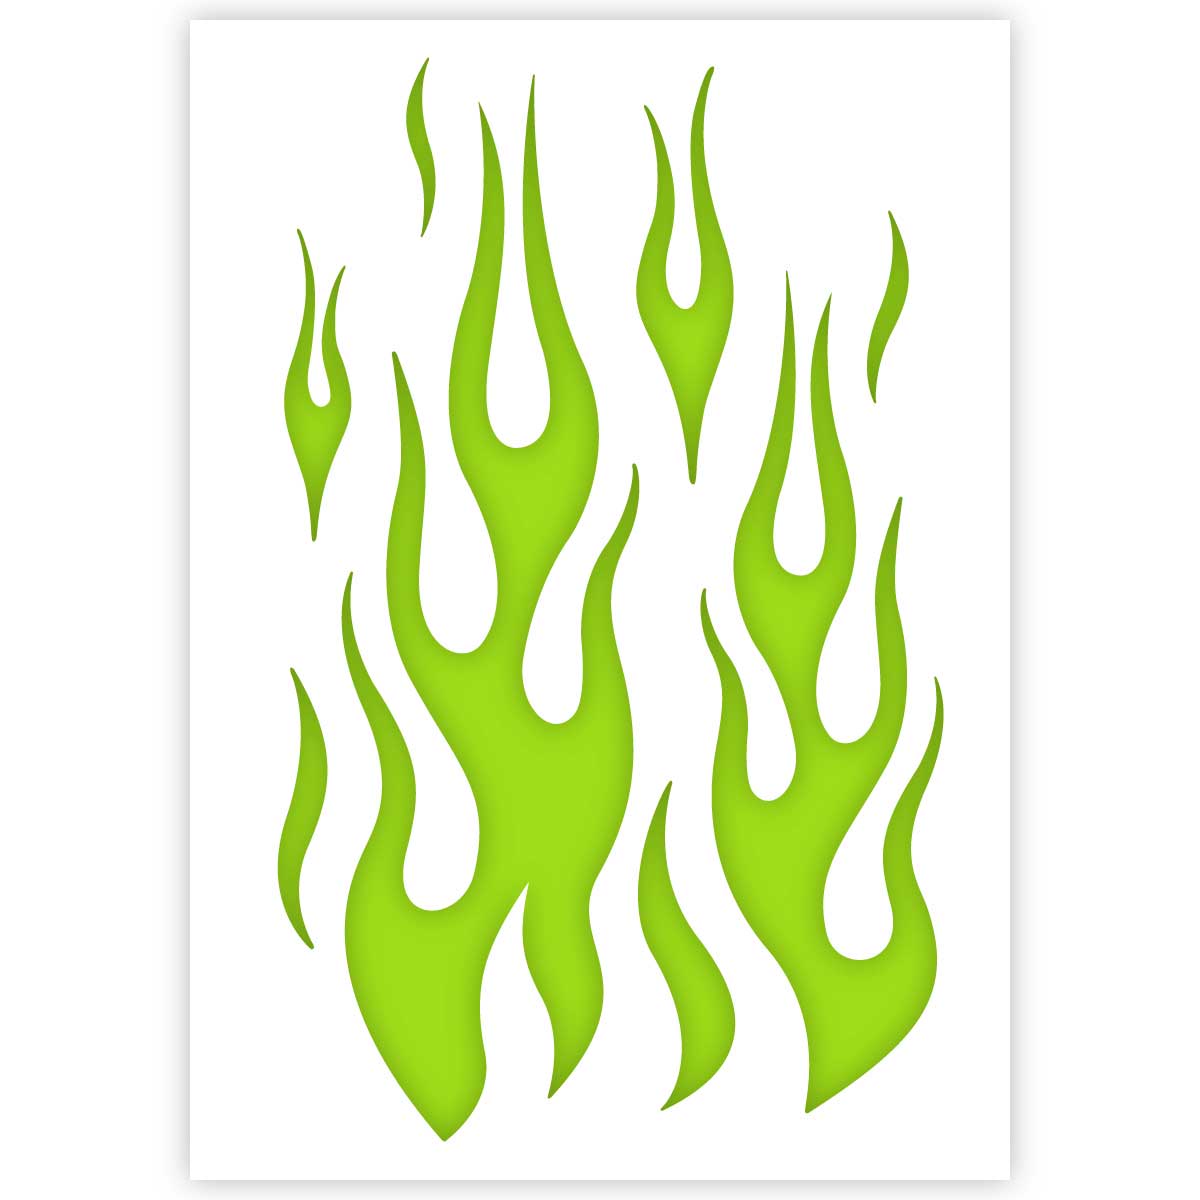 FREE!! Real Flames & Fire Airbrushing Templates Stencils FREE!!